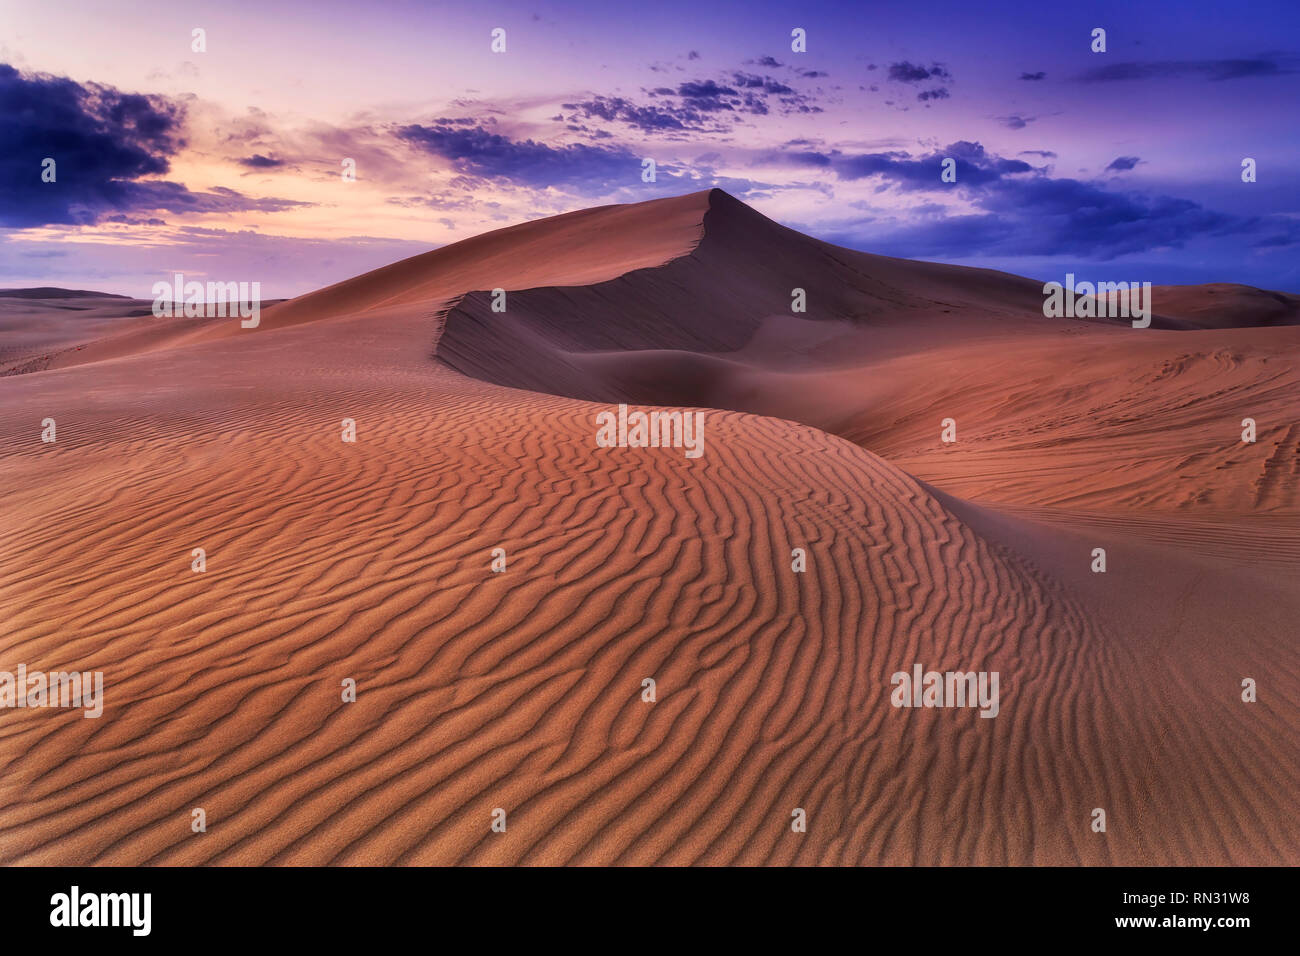 Remote empty lifeless sand desert at sunrise under dark cloudy sky with wind eroded pattern on dunes surface forming land waves. Stock Photo